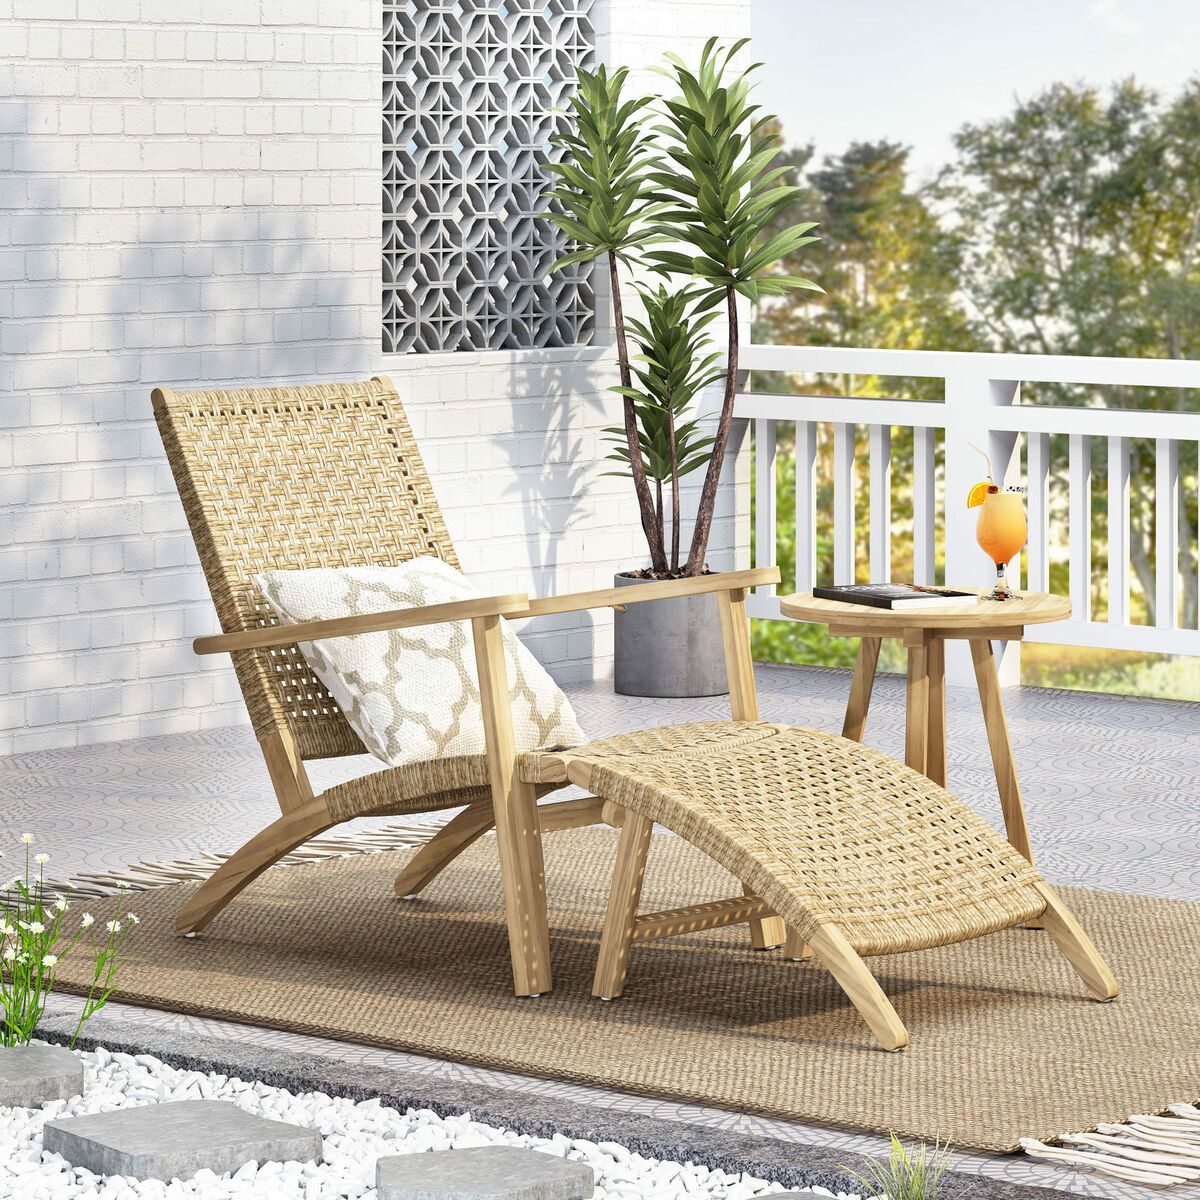 Arlost Outdoor Wicker Lounge Chair With Ottoman, Light Brown And Light  Multibrow | Ebay For Brown Wicker Chairs With Ottoman (View 11 of 15)